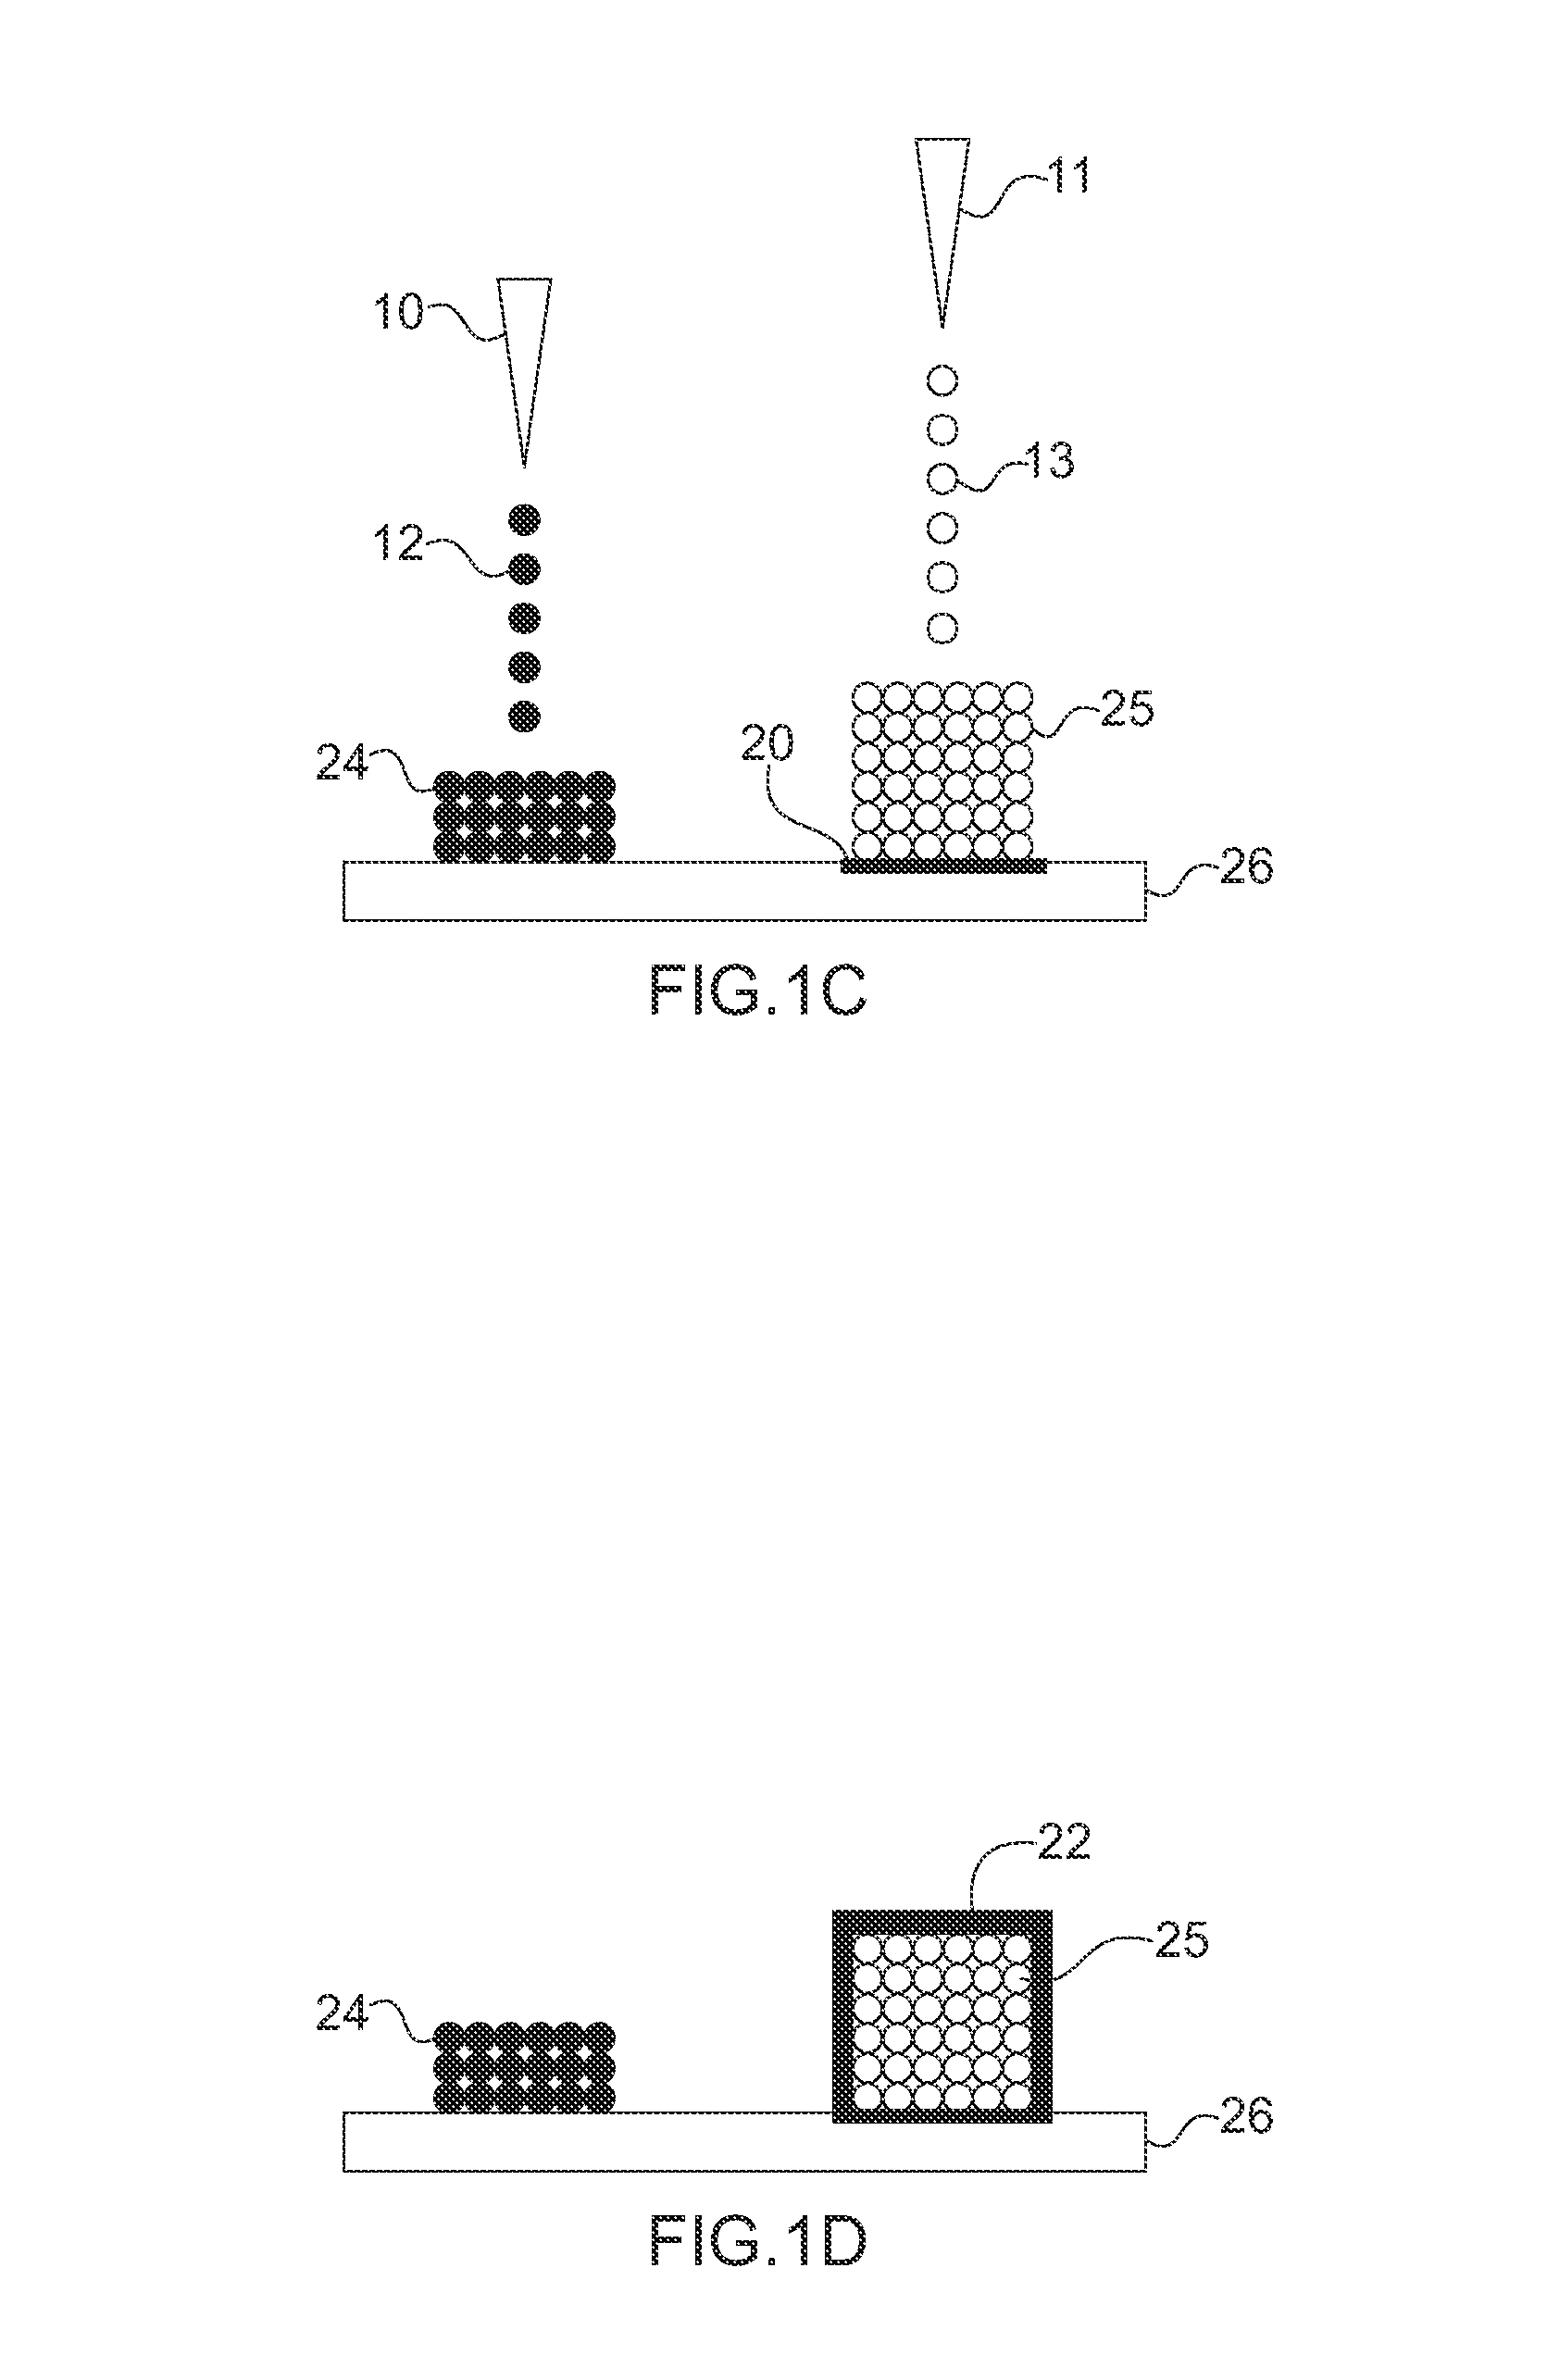 Methods of fabricating electronic and mechanical structures